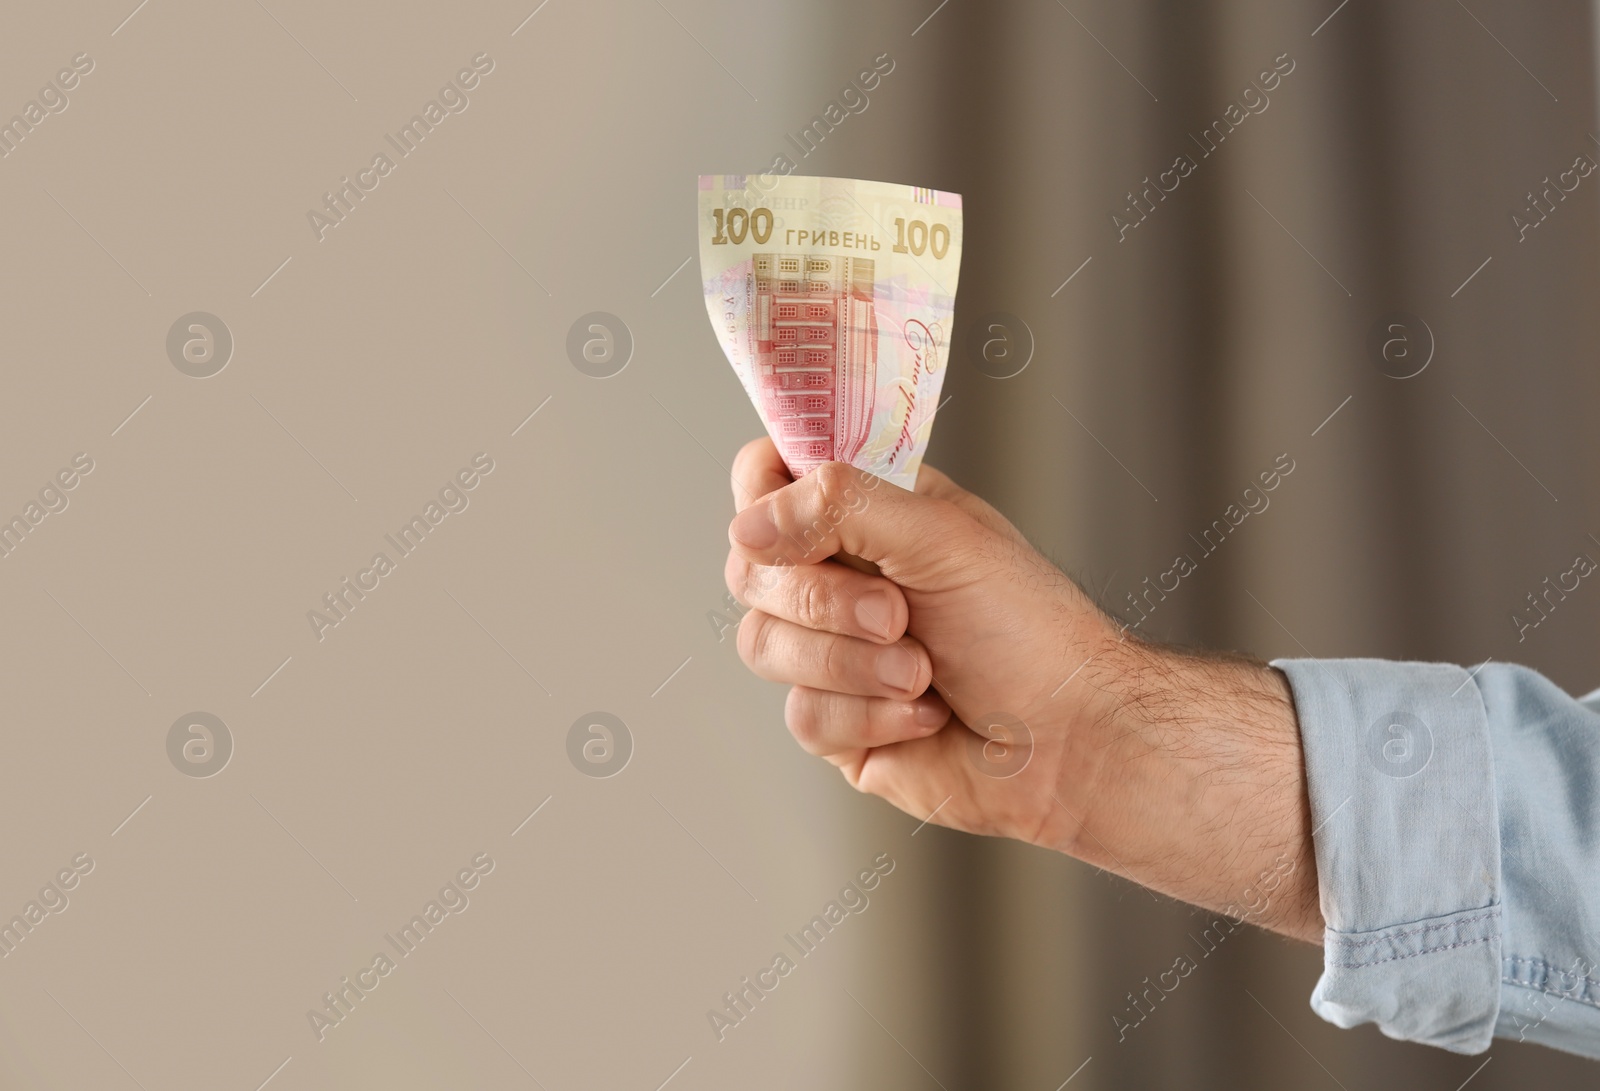 Photo of Man holding 100 Ukrainian Hryvnias banknote against blurred background, closeup with space for text. International relationships